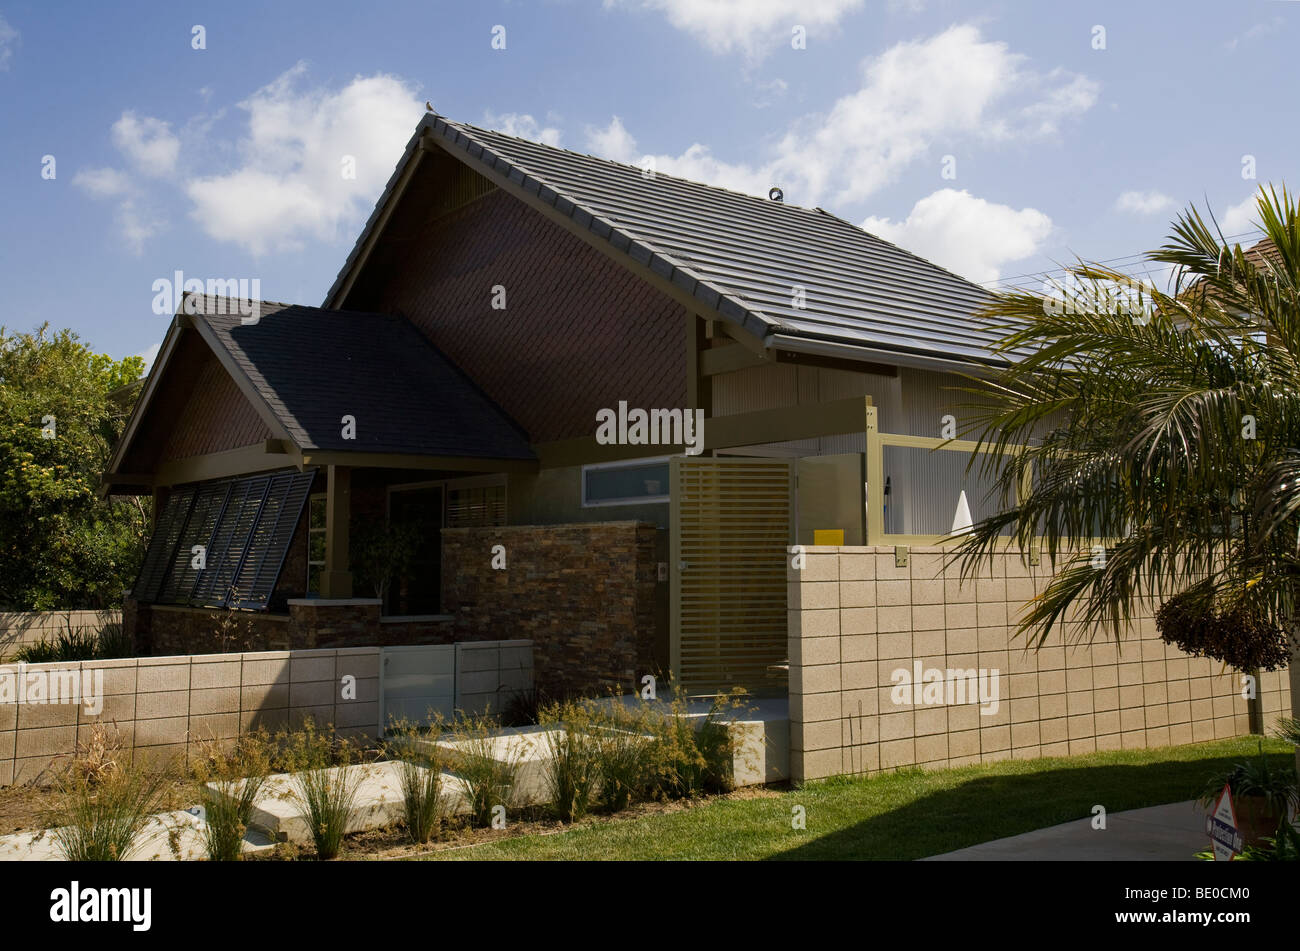 House in Long Beach retrofitted with Building Integrated Photovoltaics (BIPV) Modules, California, USA Stock Photo